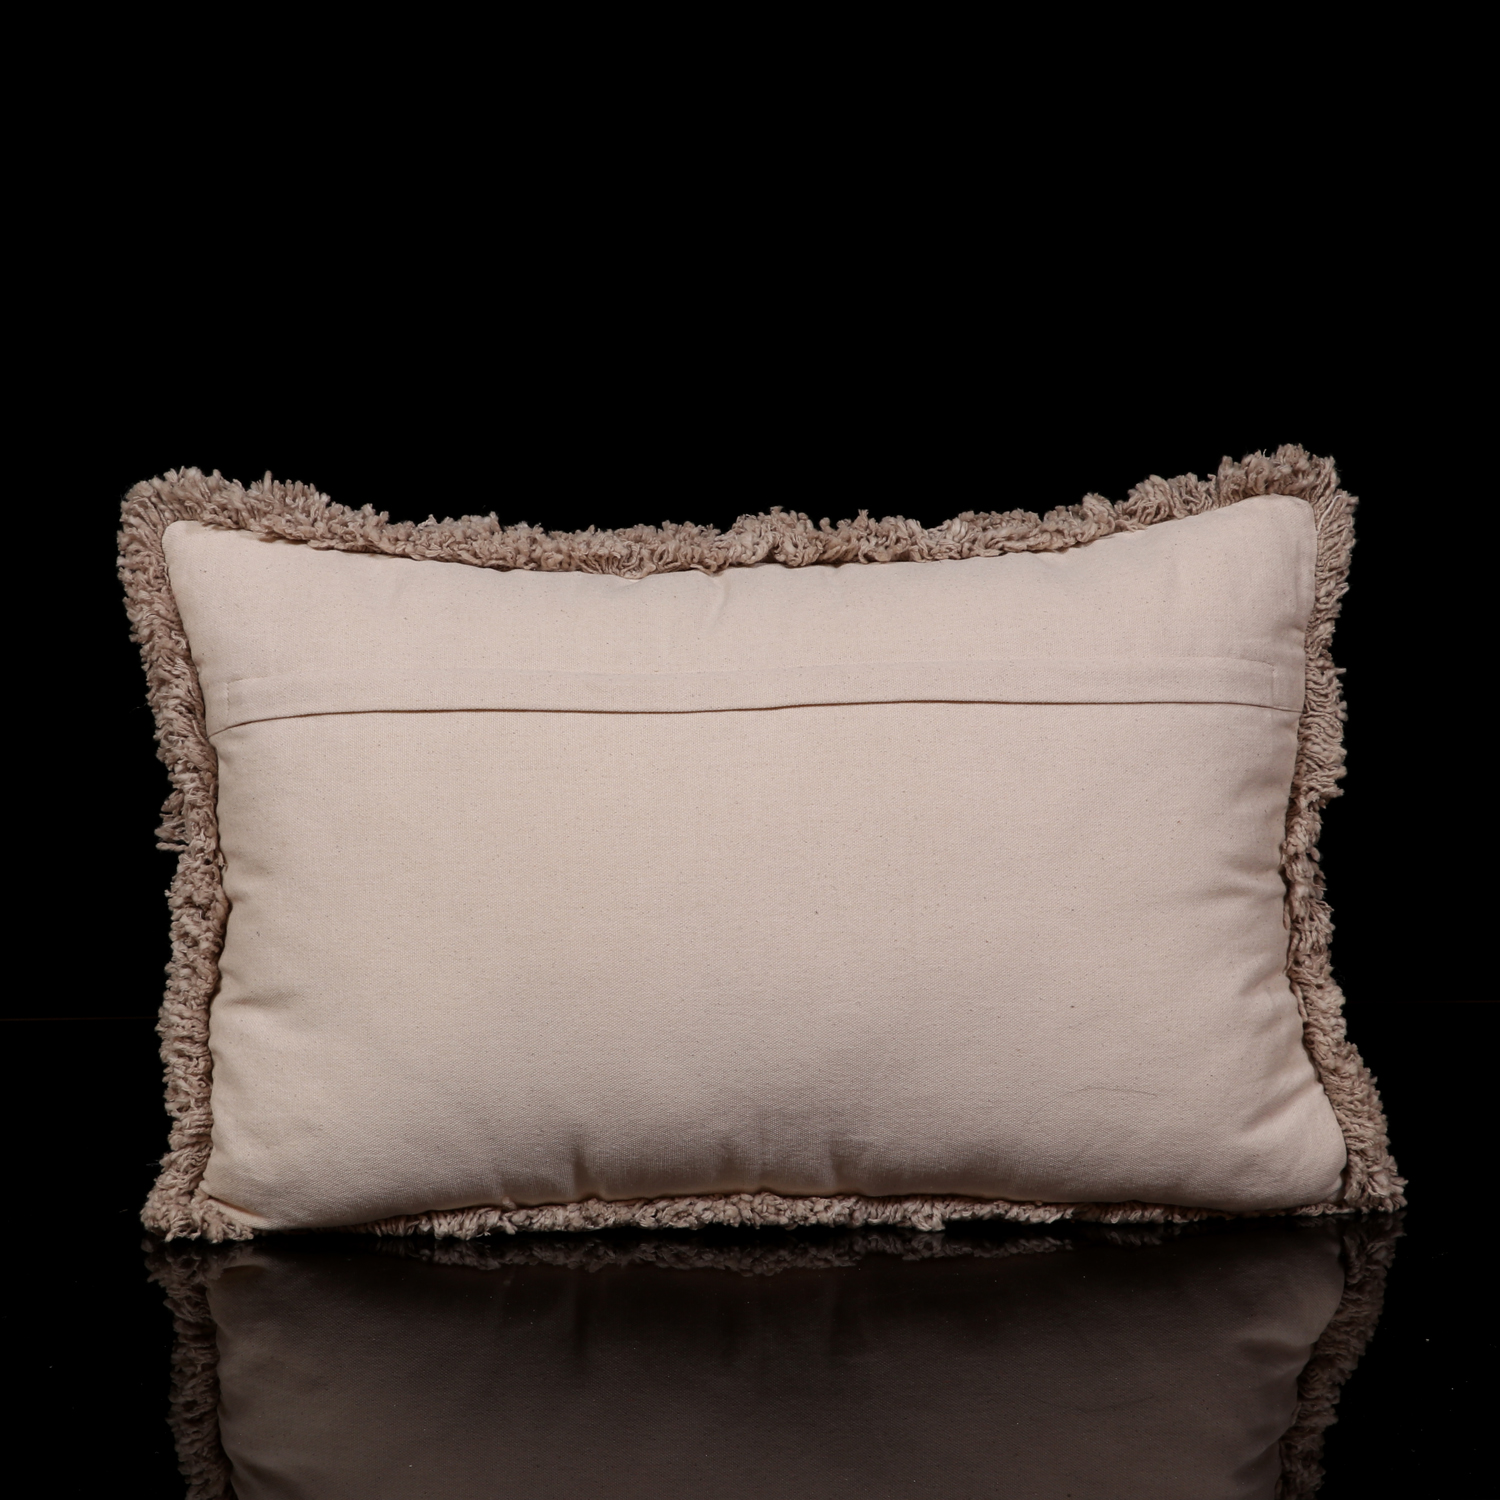 EMBROIDERED CIRCLES DESIGN LUMBAR PILLOW WITH FRINGES ON EDGES